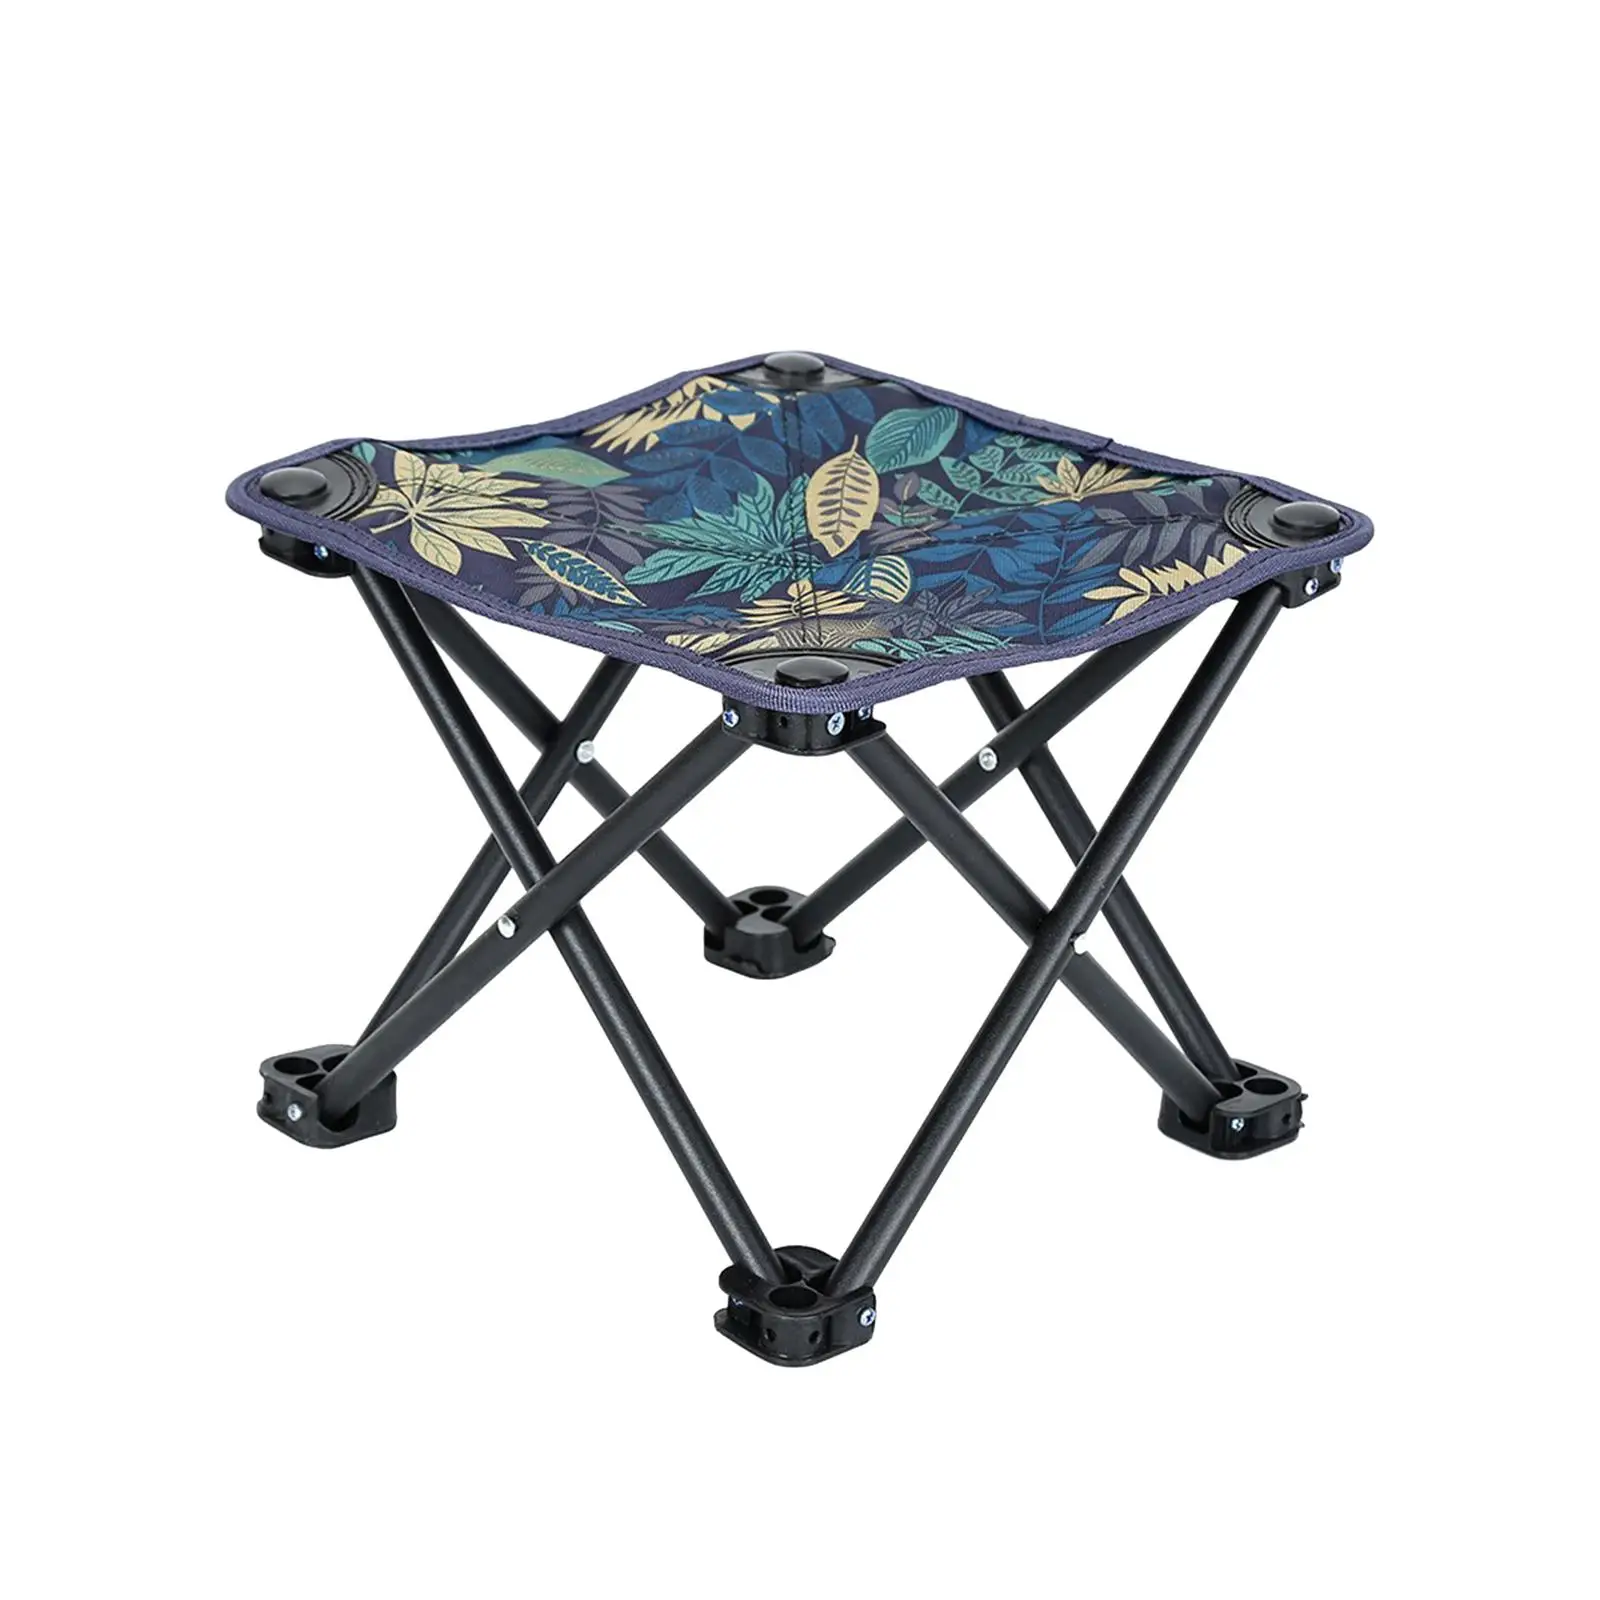 Camping Stool Heavy Duty Practical Reusable Lightweight Durable Foldable Folding Stool for BBQ Garden Traveling Fishing Backyard